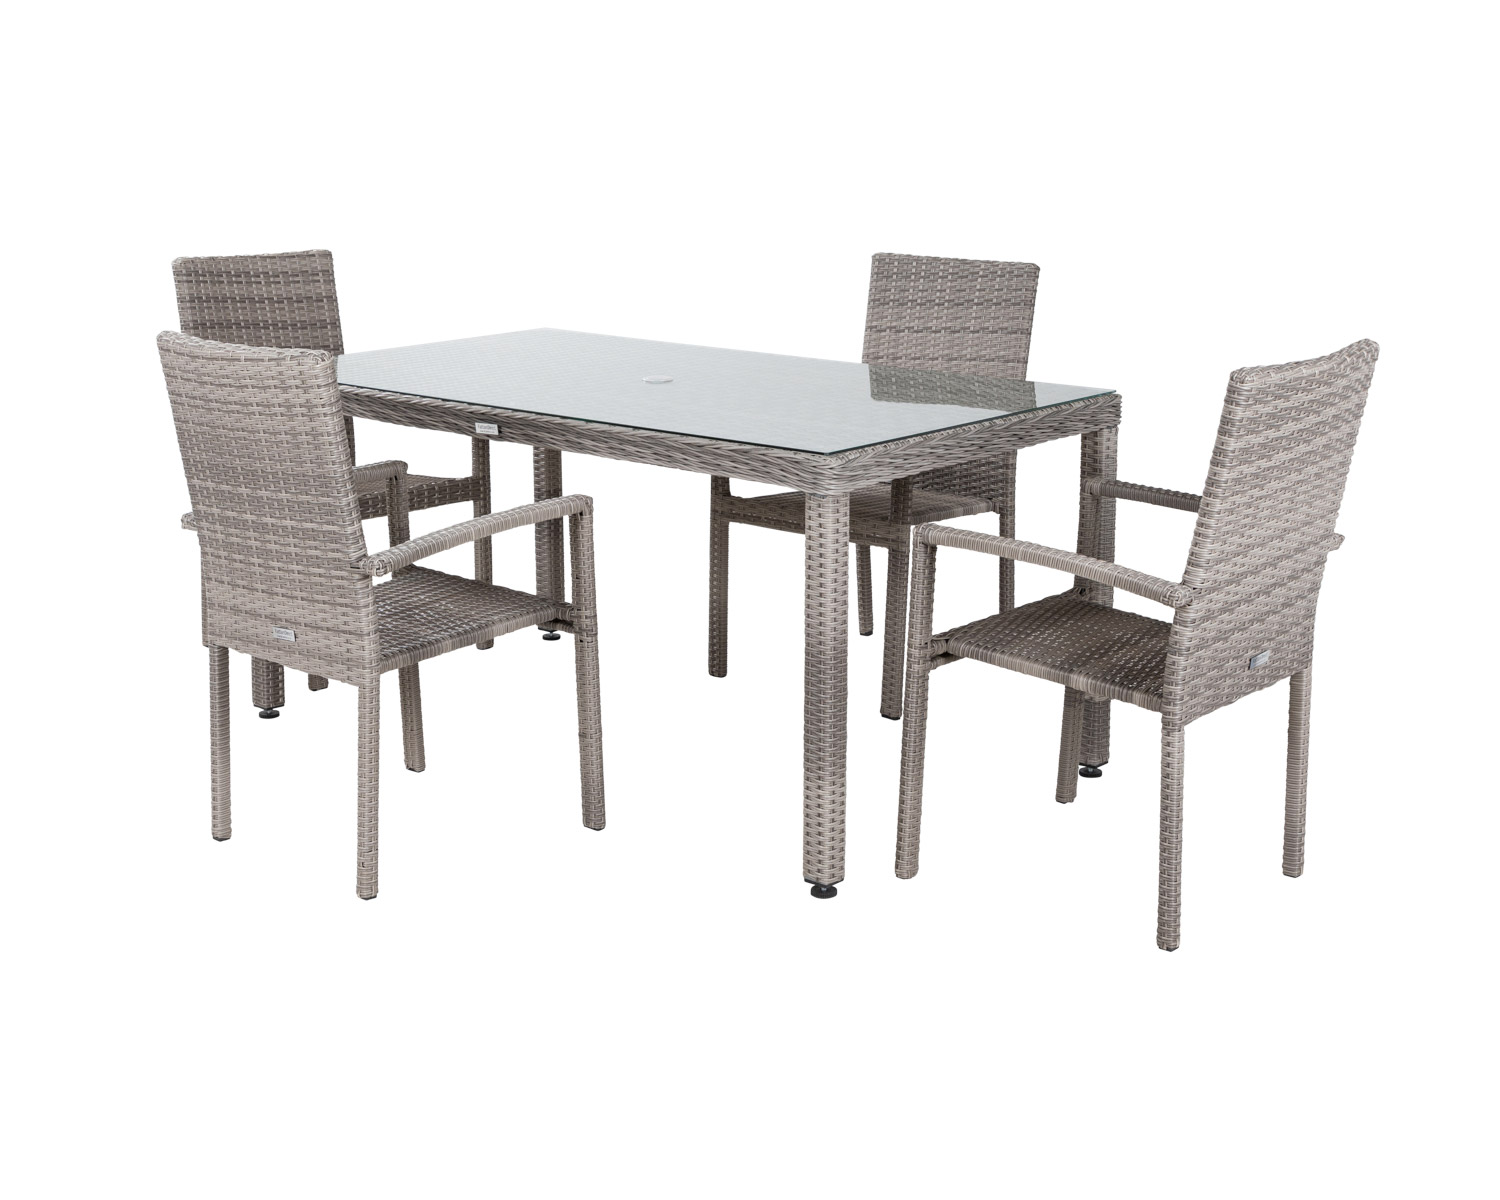 4 Seat Rattan Garden Dining Set With Rectangular Open Leg Dining Table In Grey Rio Rattan Direct